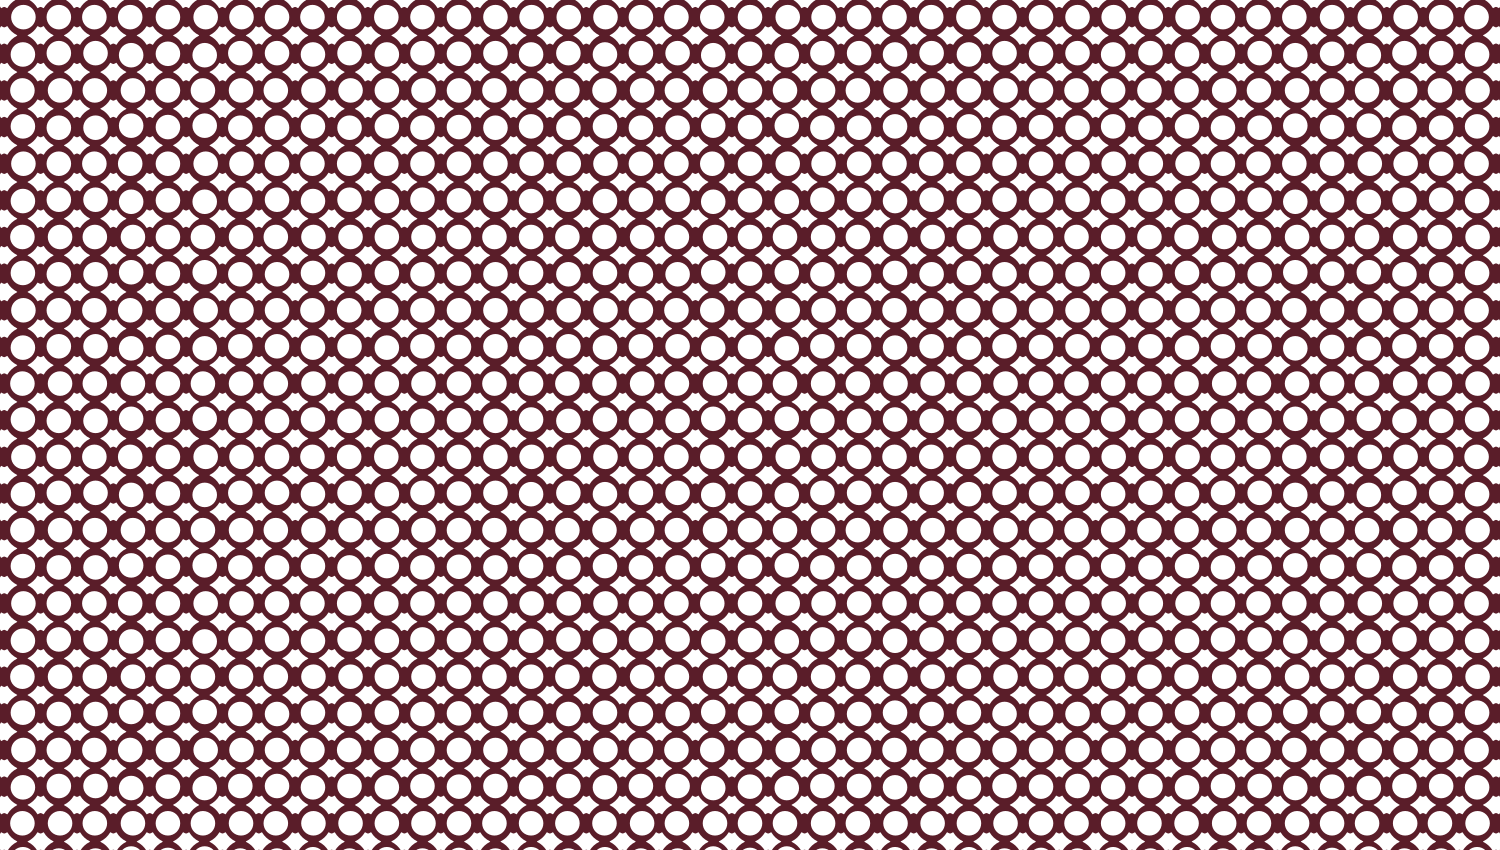 Parasoleil™ Fathoms© pattern displayed with a burgundy color overlay